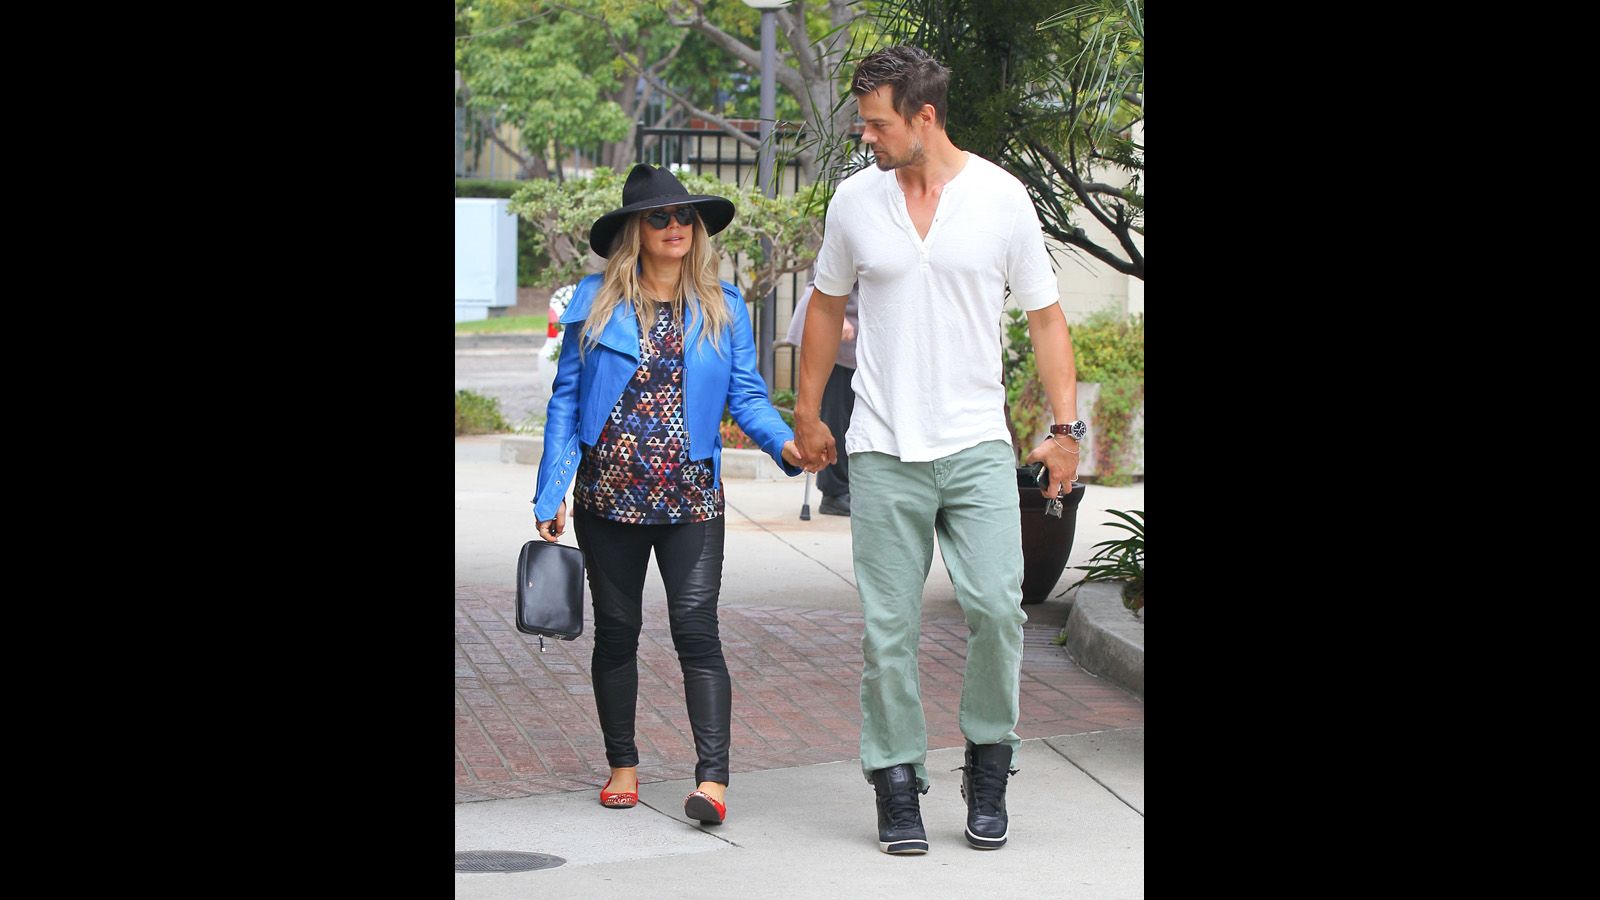 Fergie and Josh Duhamel welcome their baby Axl Jack